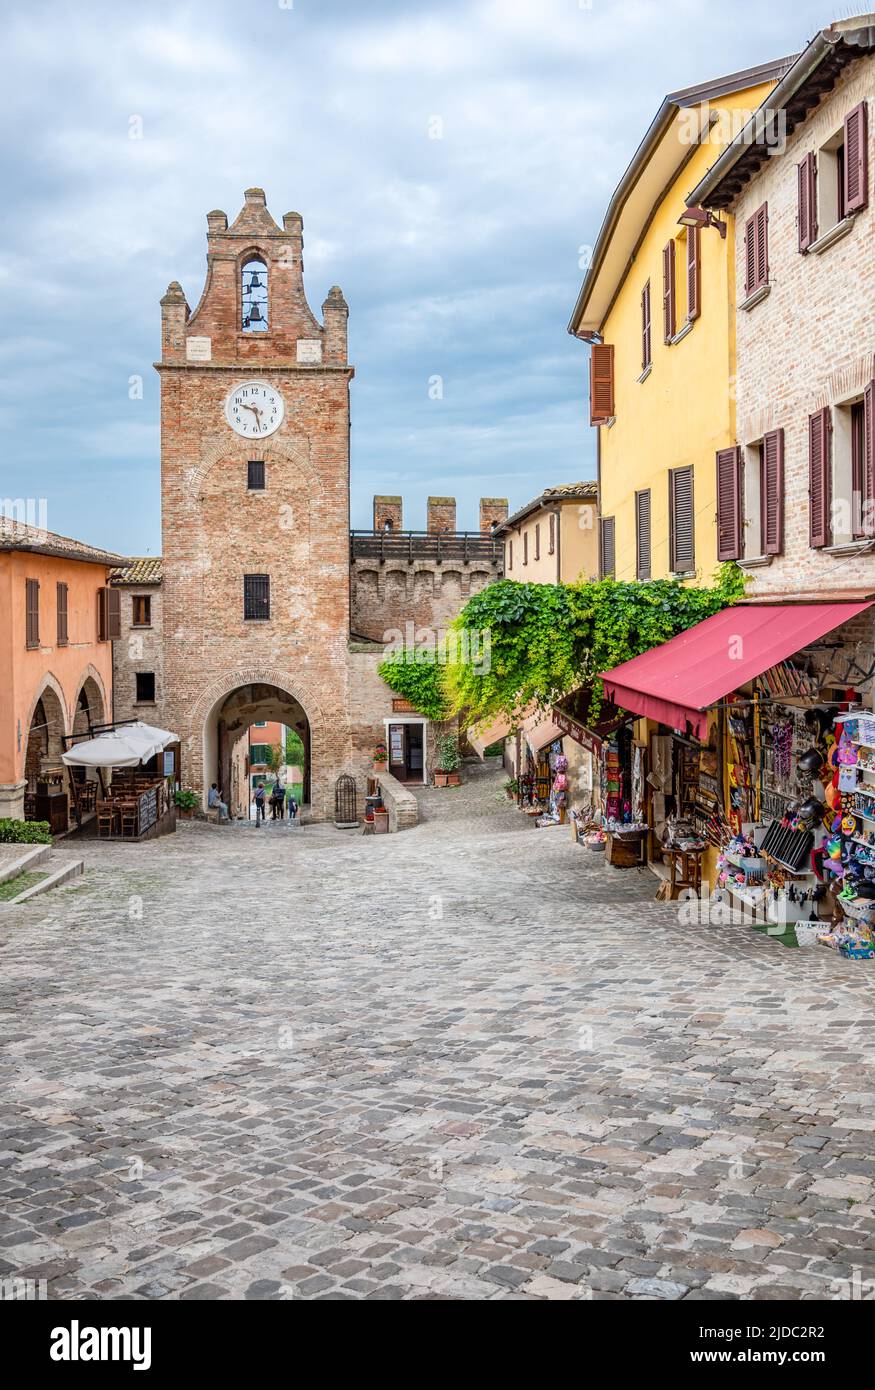 Gradara, Italy - May 29, 2018: View of the main square with the clock tower Stock Photo